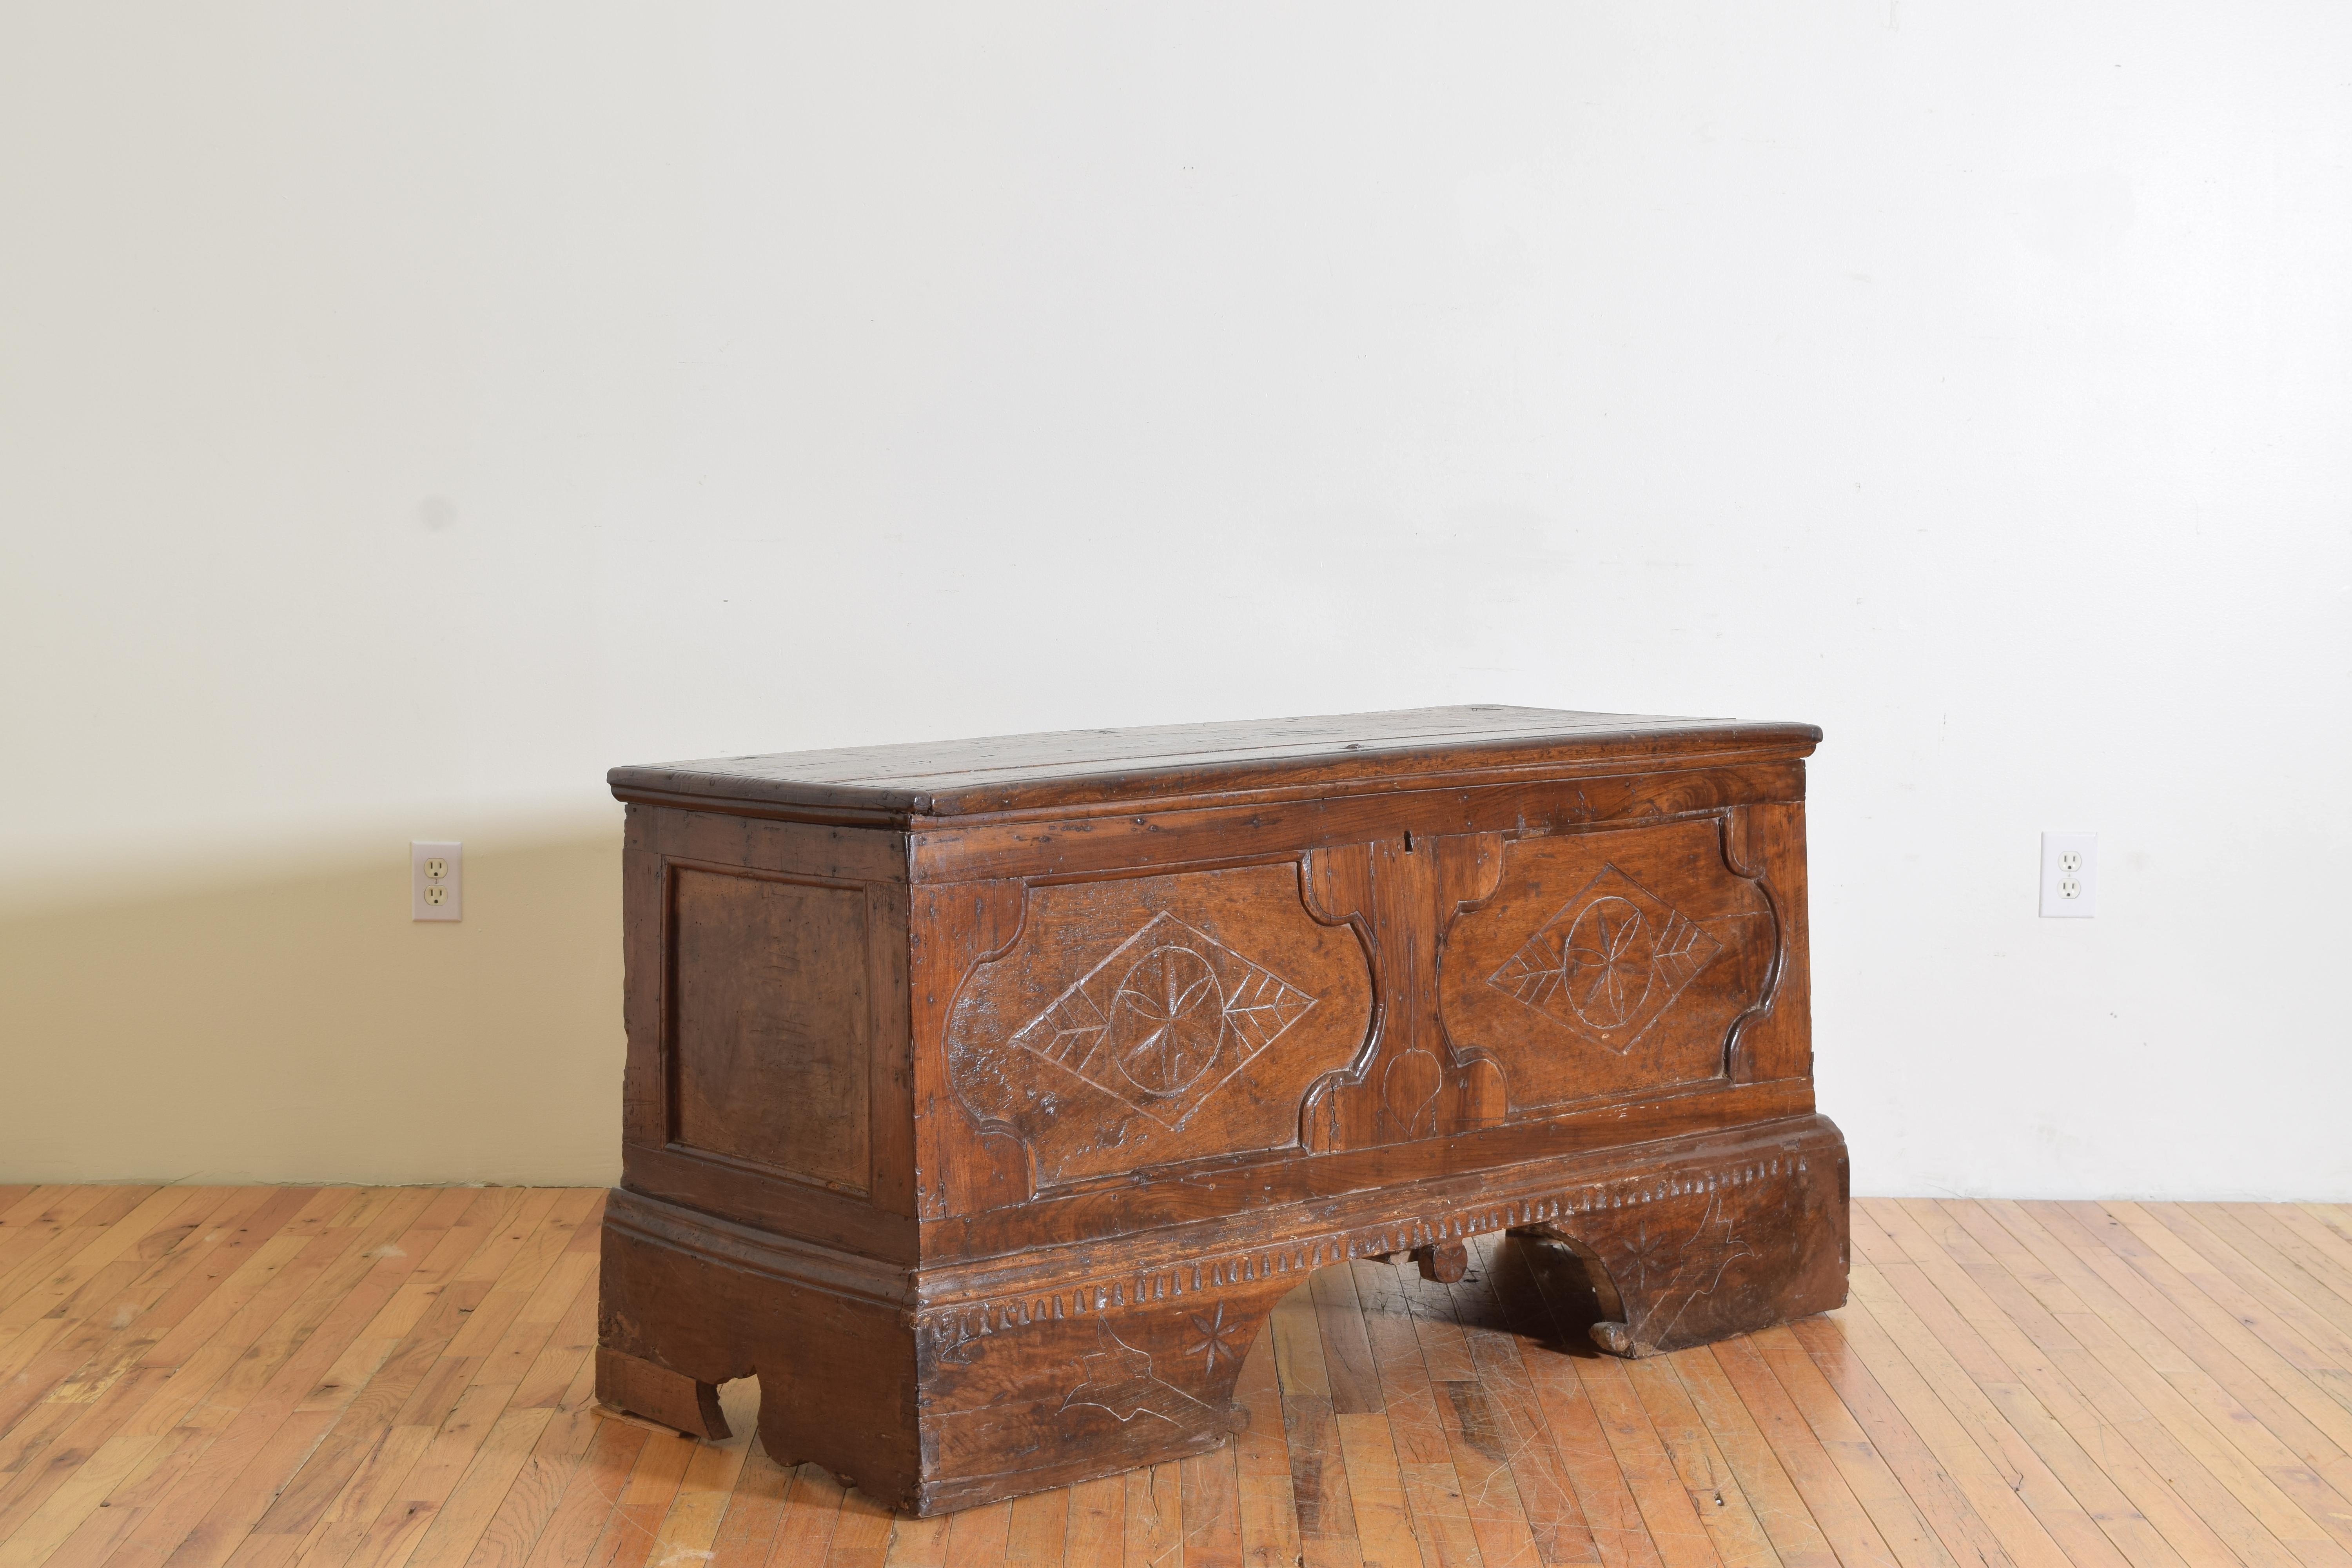 Having a molded edge rectangular hinged top above a conforming case housing a large storage area, the case paneled and carved with primitive decorations, raised on large bracket feet